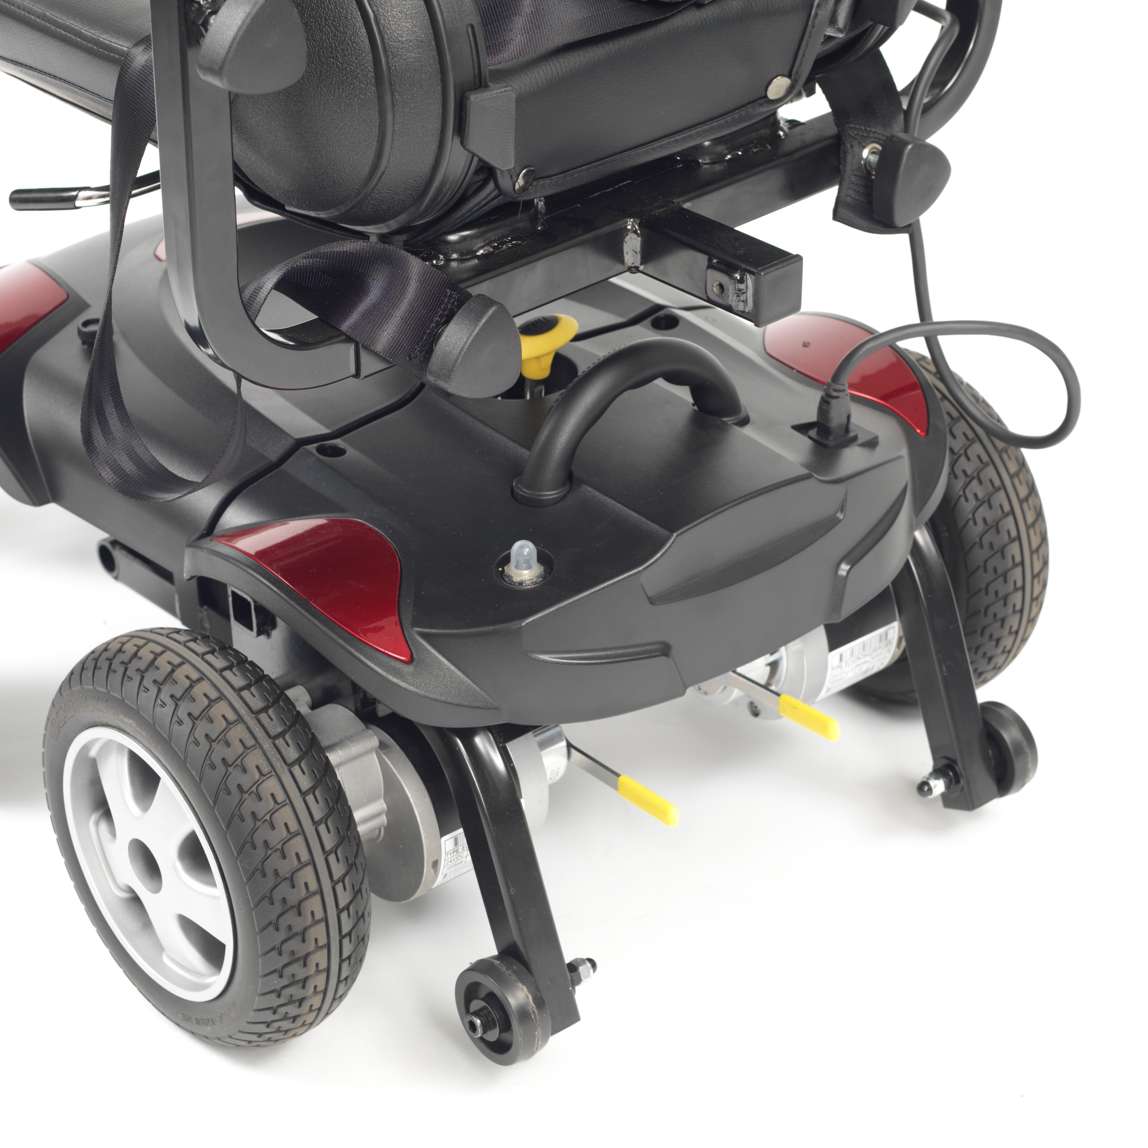 Titan LTE Powerchair - Compact and Transportable Indoor Mobility Solution